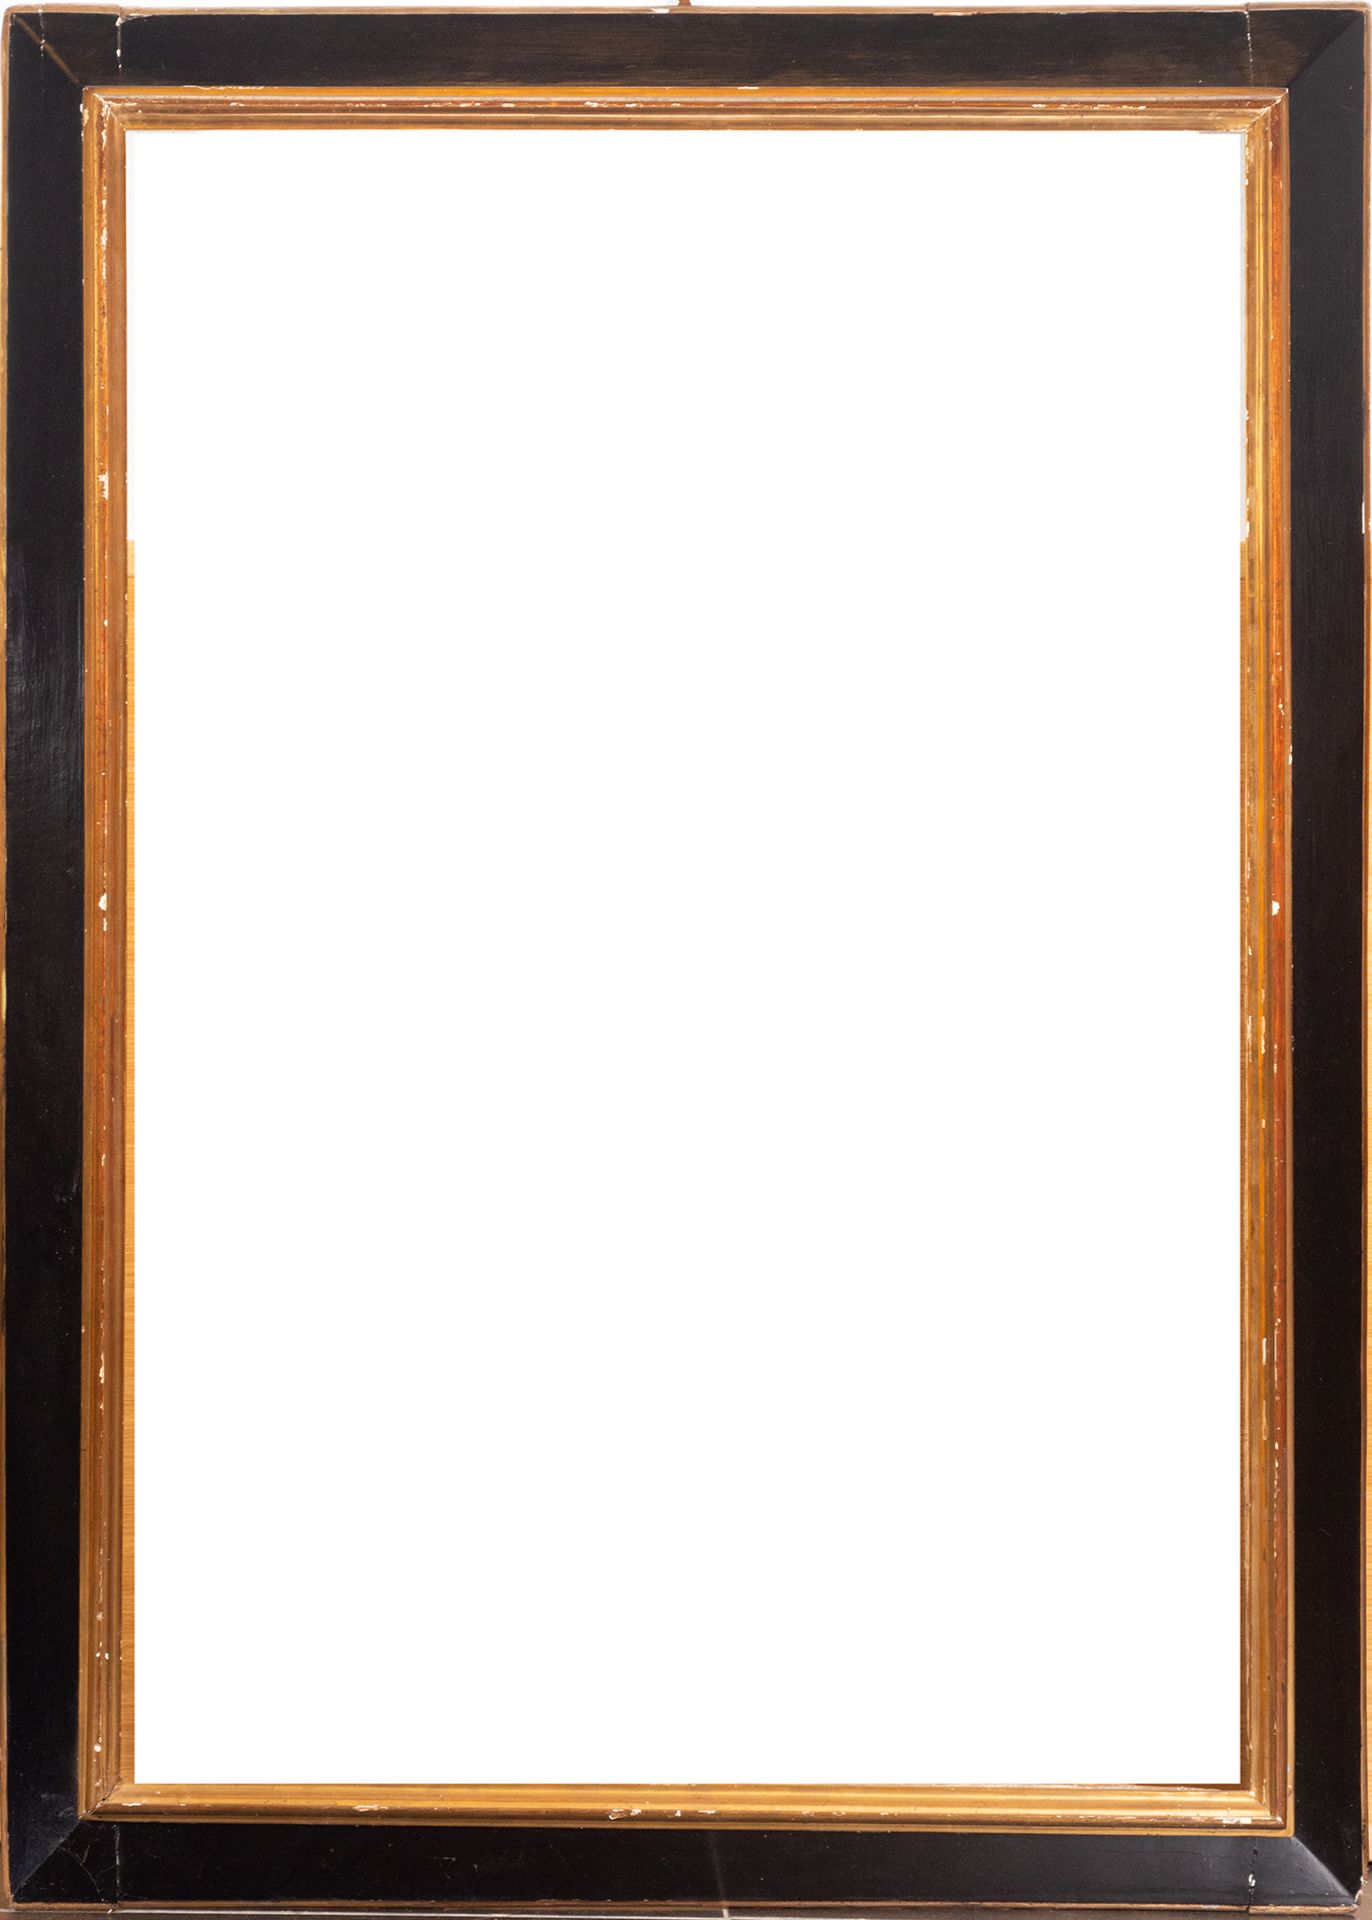 Smooth ebonized and gilt frame from the 18th century